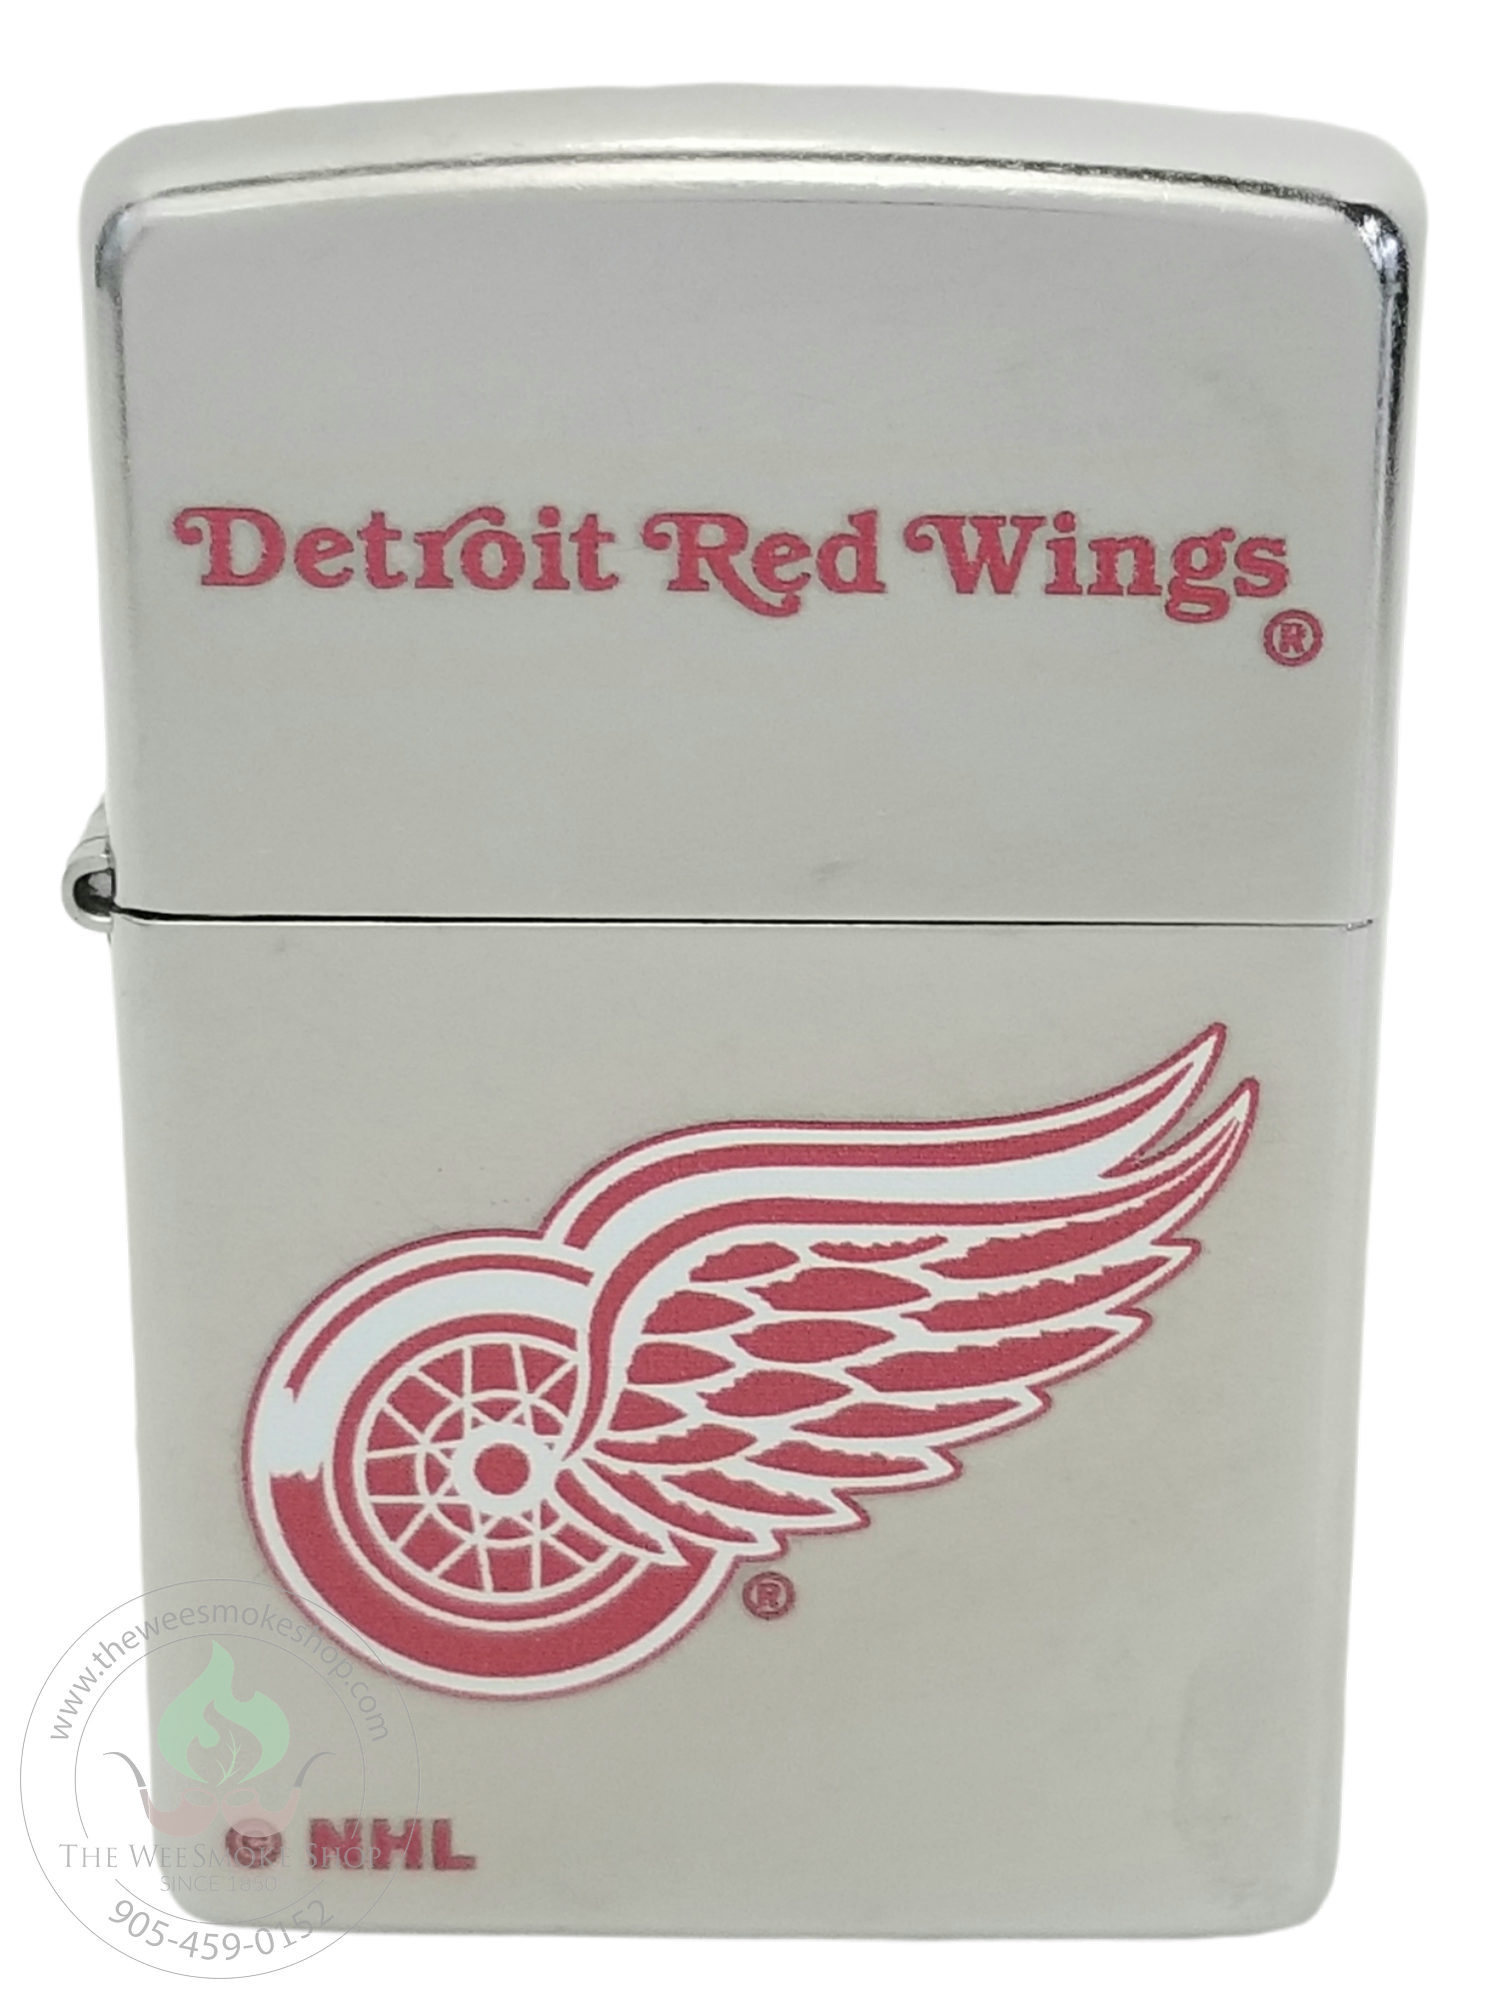 NHL Detroit Red Wings Zippo Lighter-Zippo Lighter-The Wee Smoke Shop